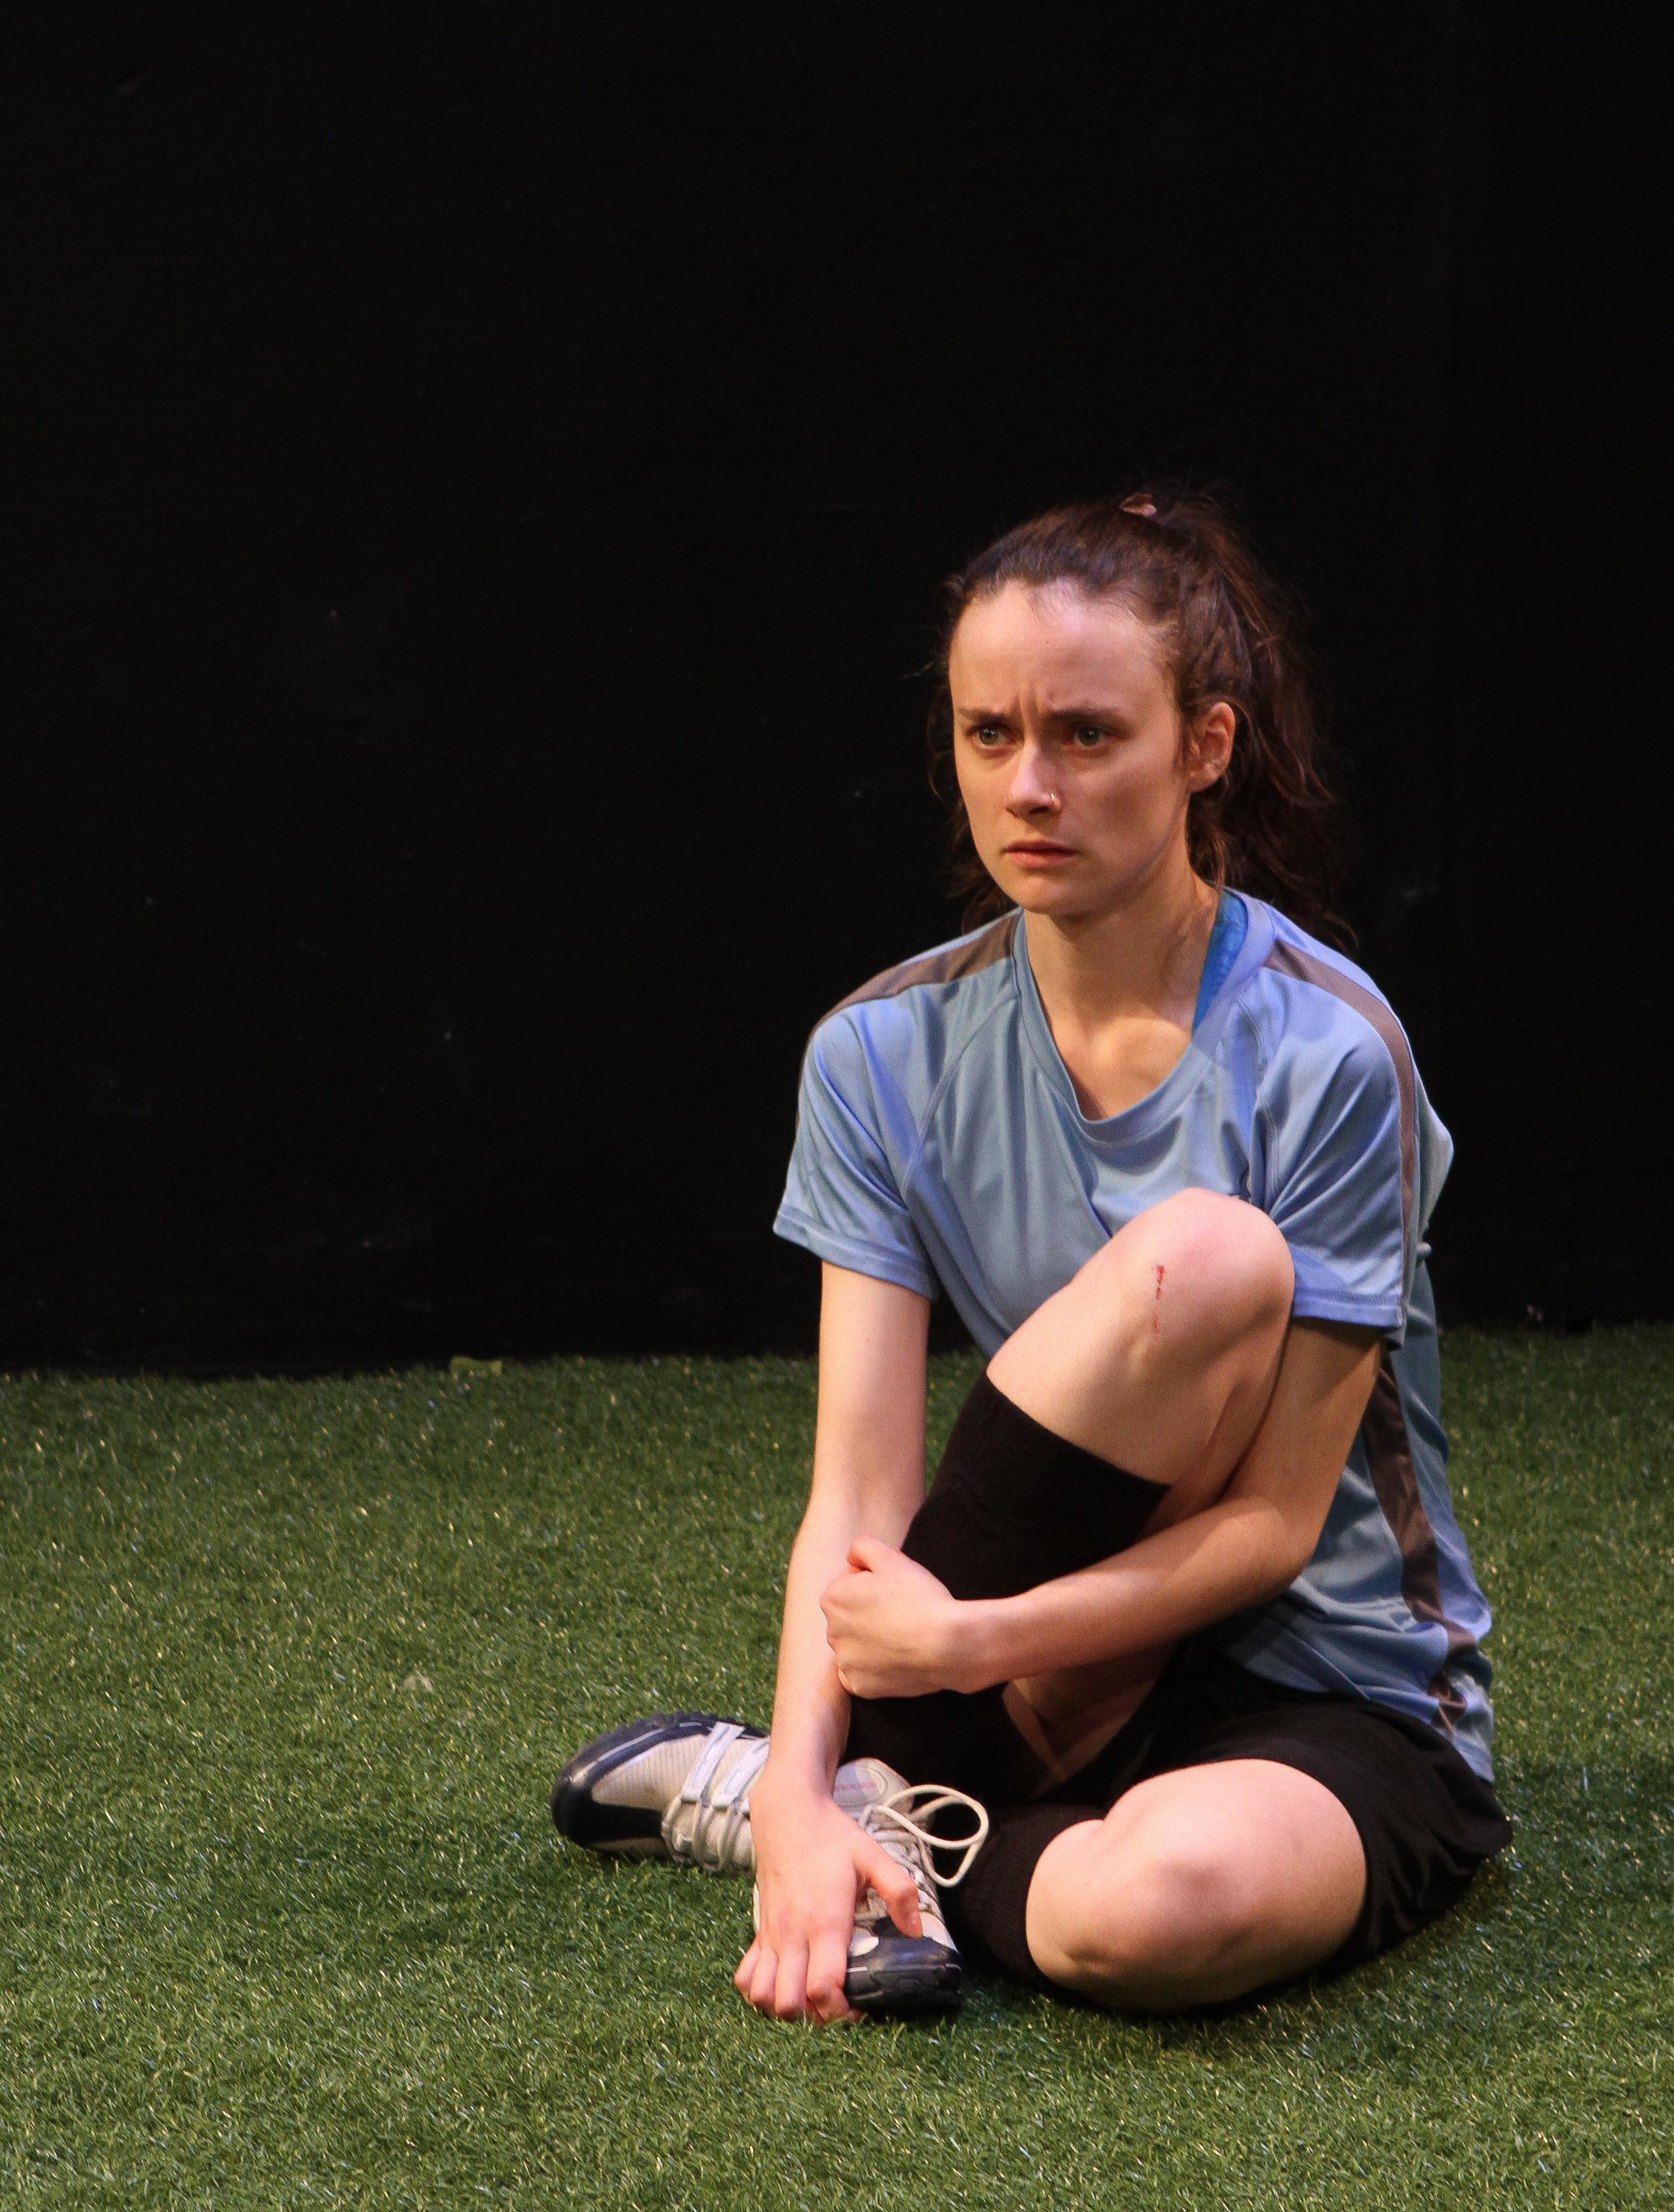  Production photos by: Ron Reed  Featuring: Paige Louter 